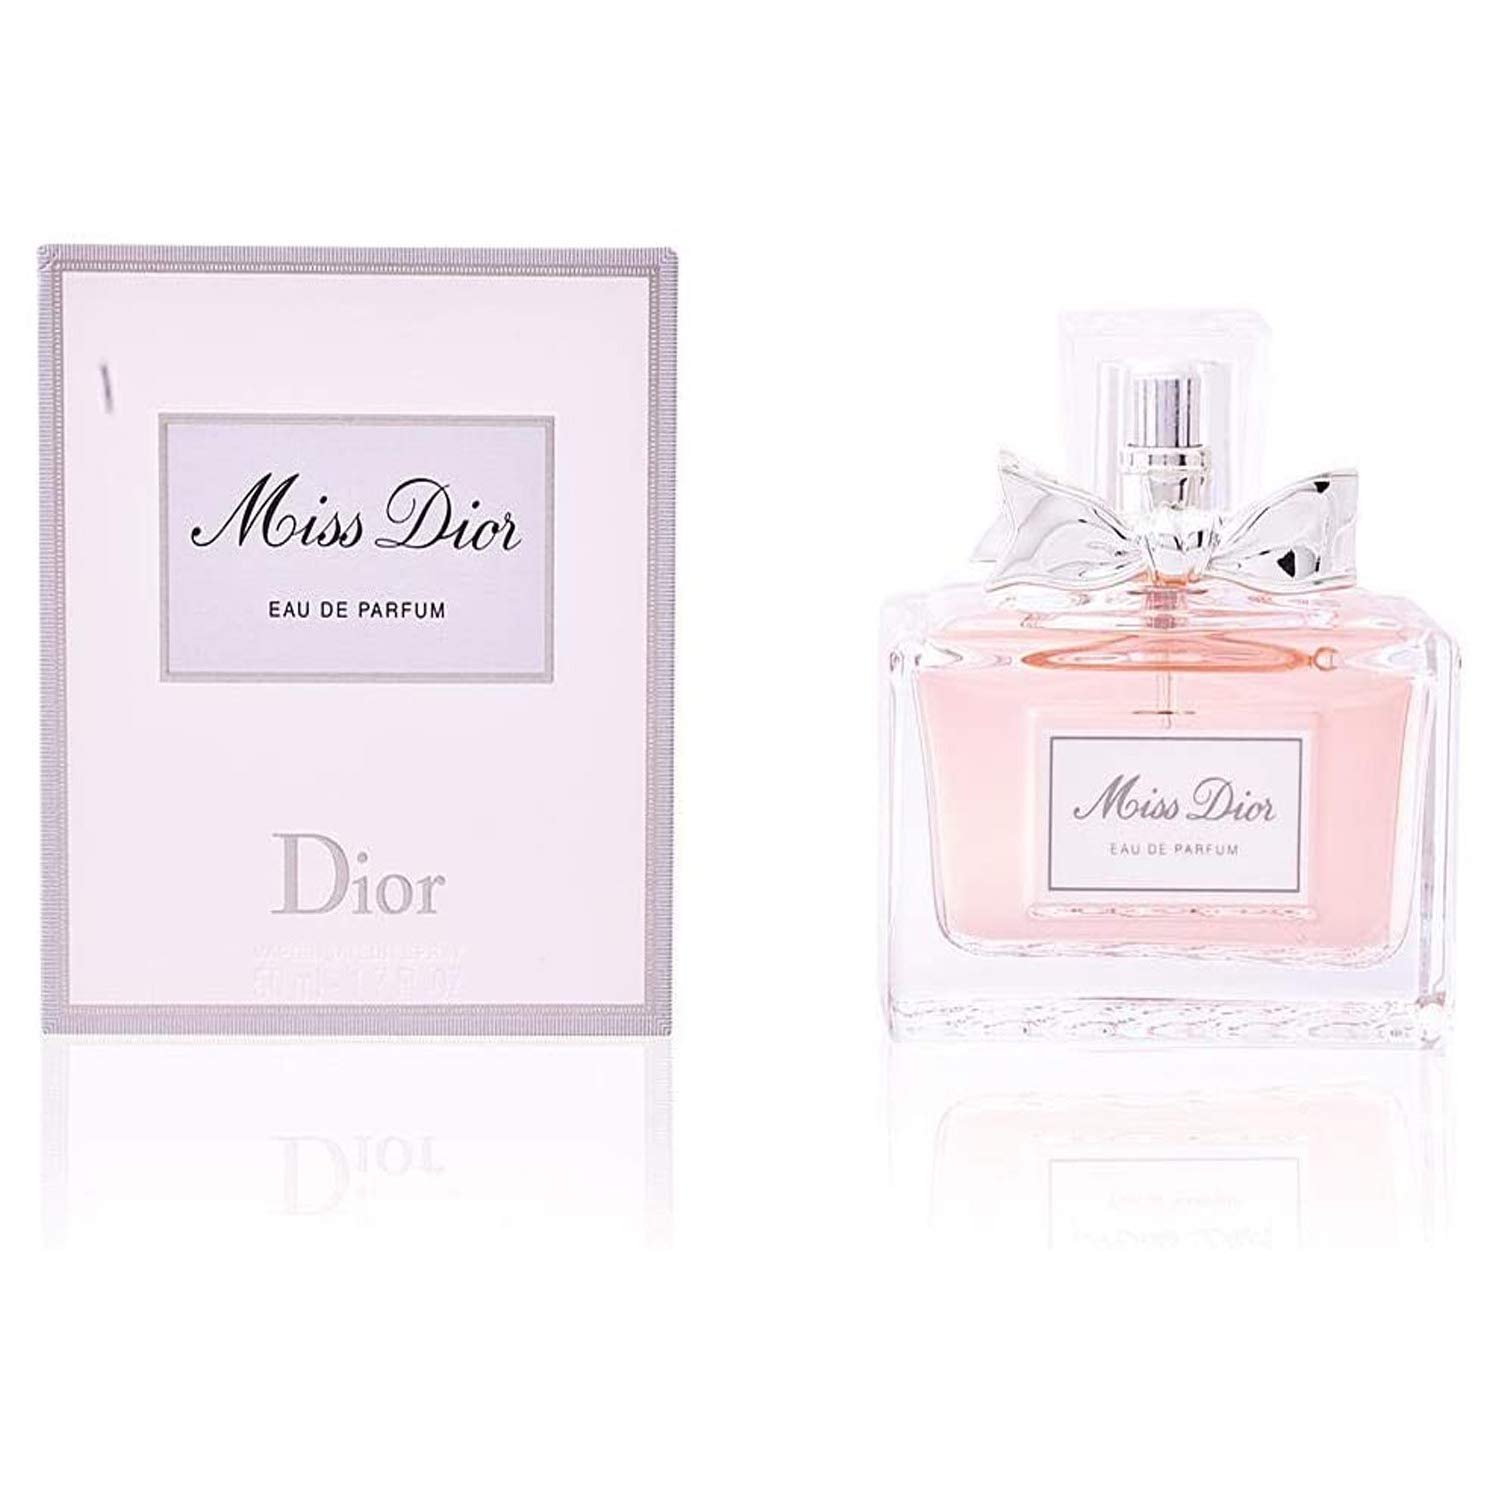 MISS DIOR PERFUME COLLECTION OVERVIEW  Best To Worst Ranking  YouTube